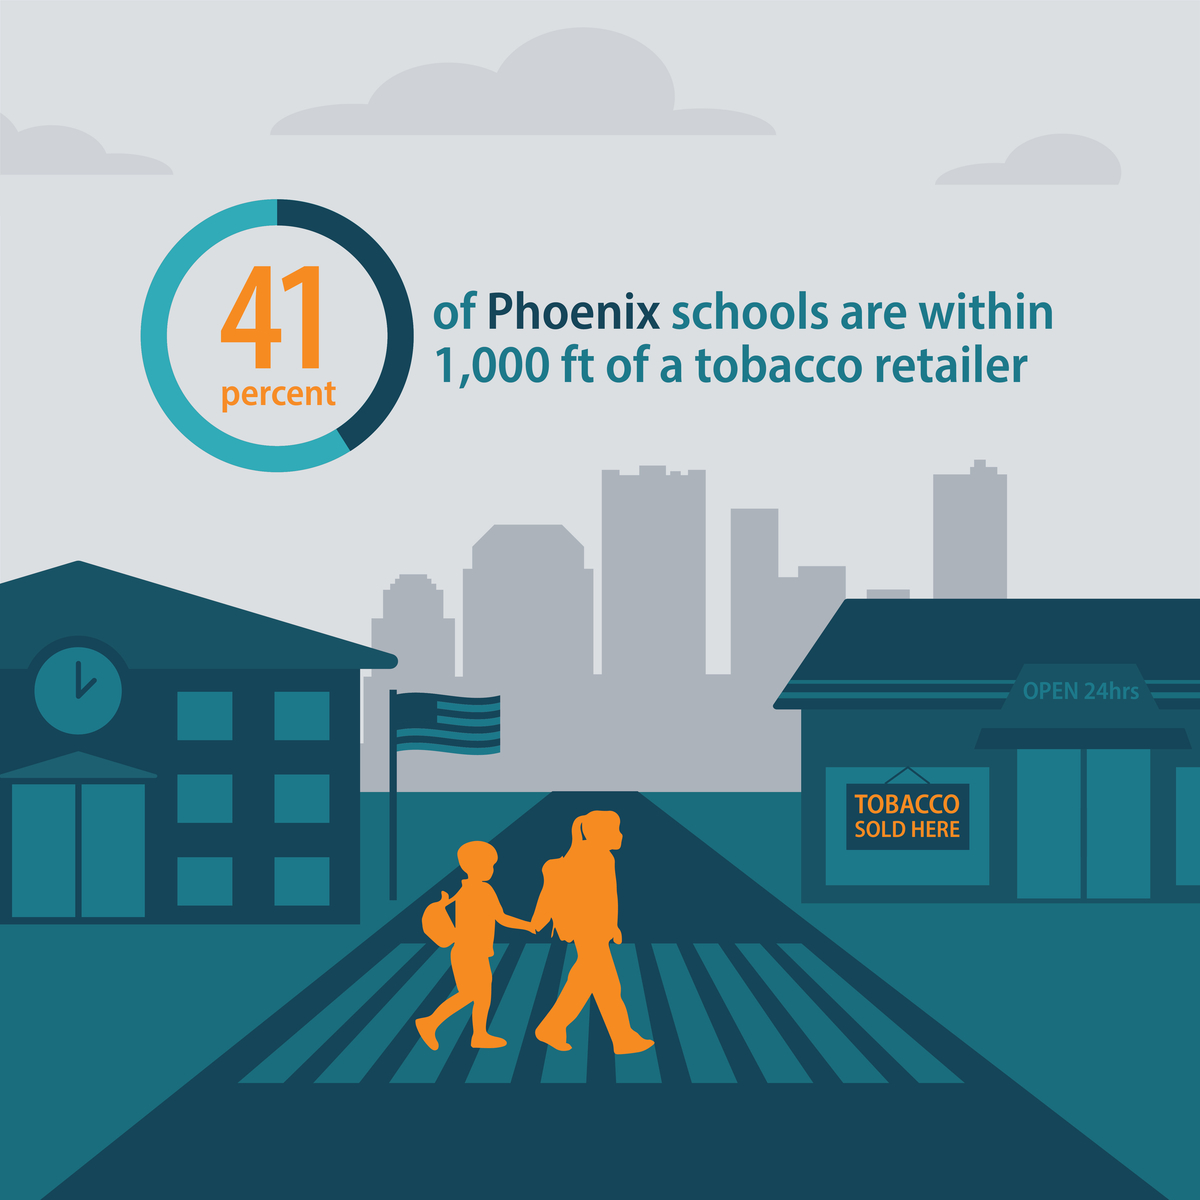 41 percent of Phoenix schools are within 1,000 feet of a tobacco retailer